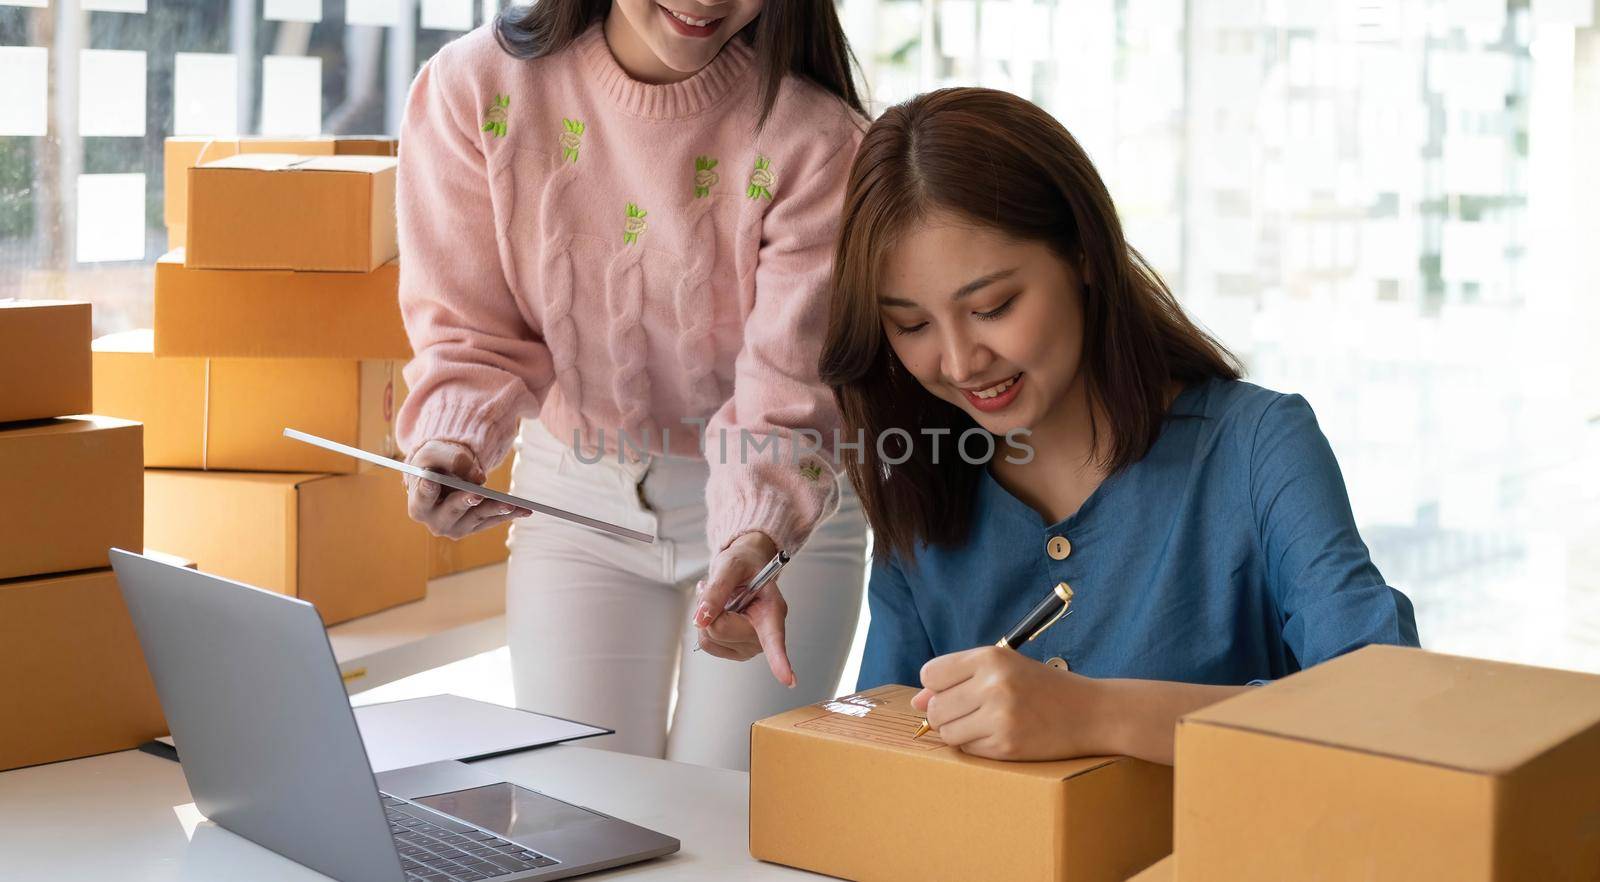 Portrait of Starting small businesses SME owners, two Asian woman check online orders Selling products working with boxs freelance work at home office, sme business online small medium enterprise.